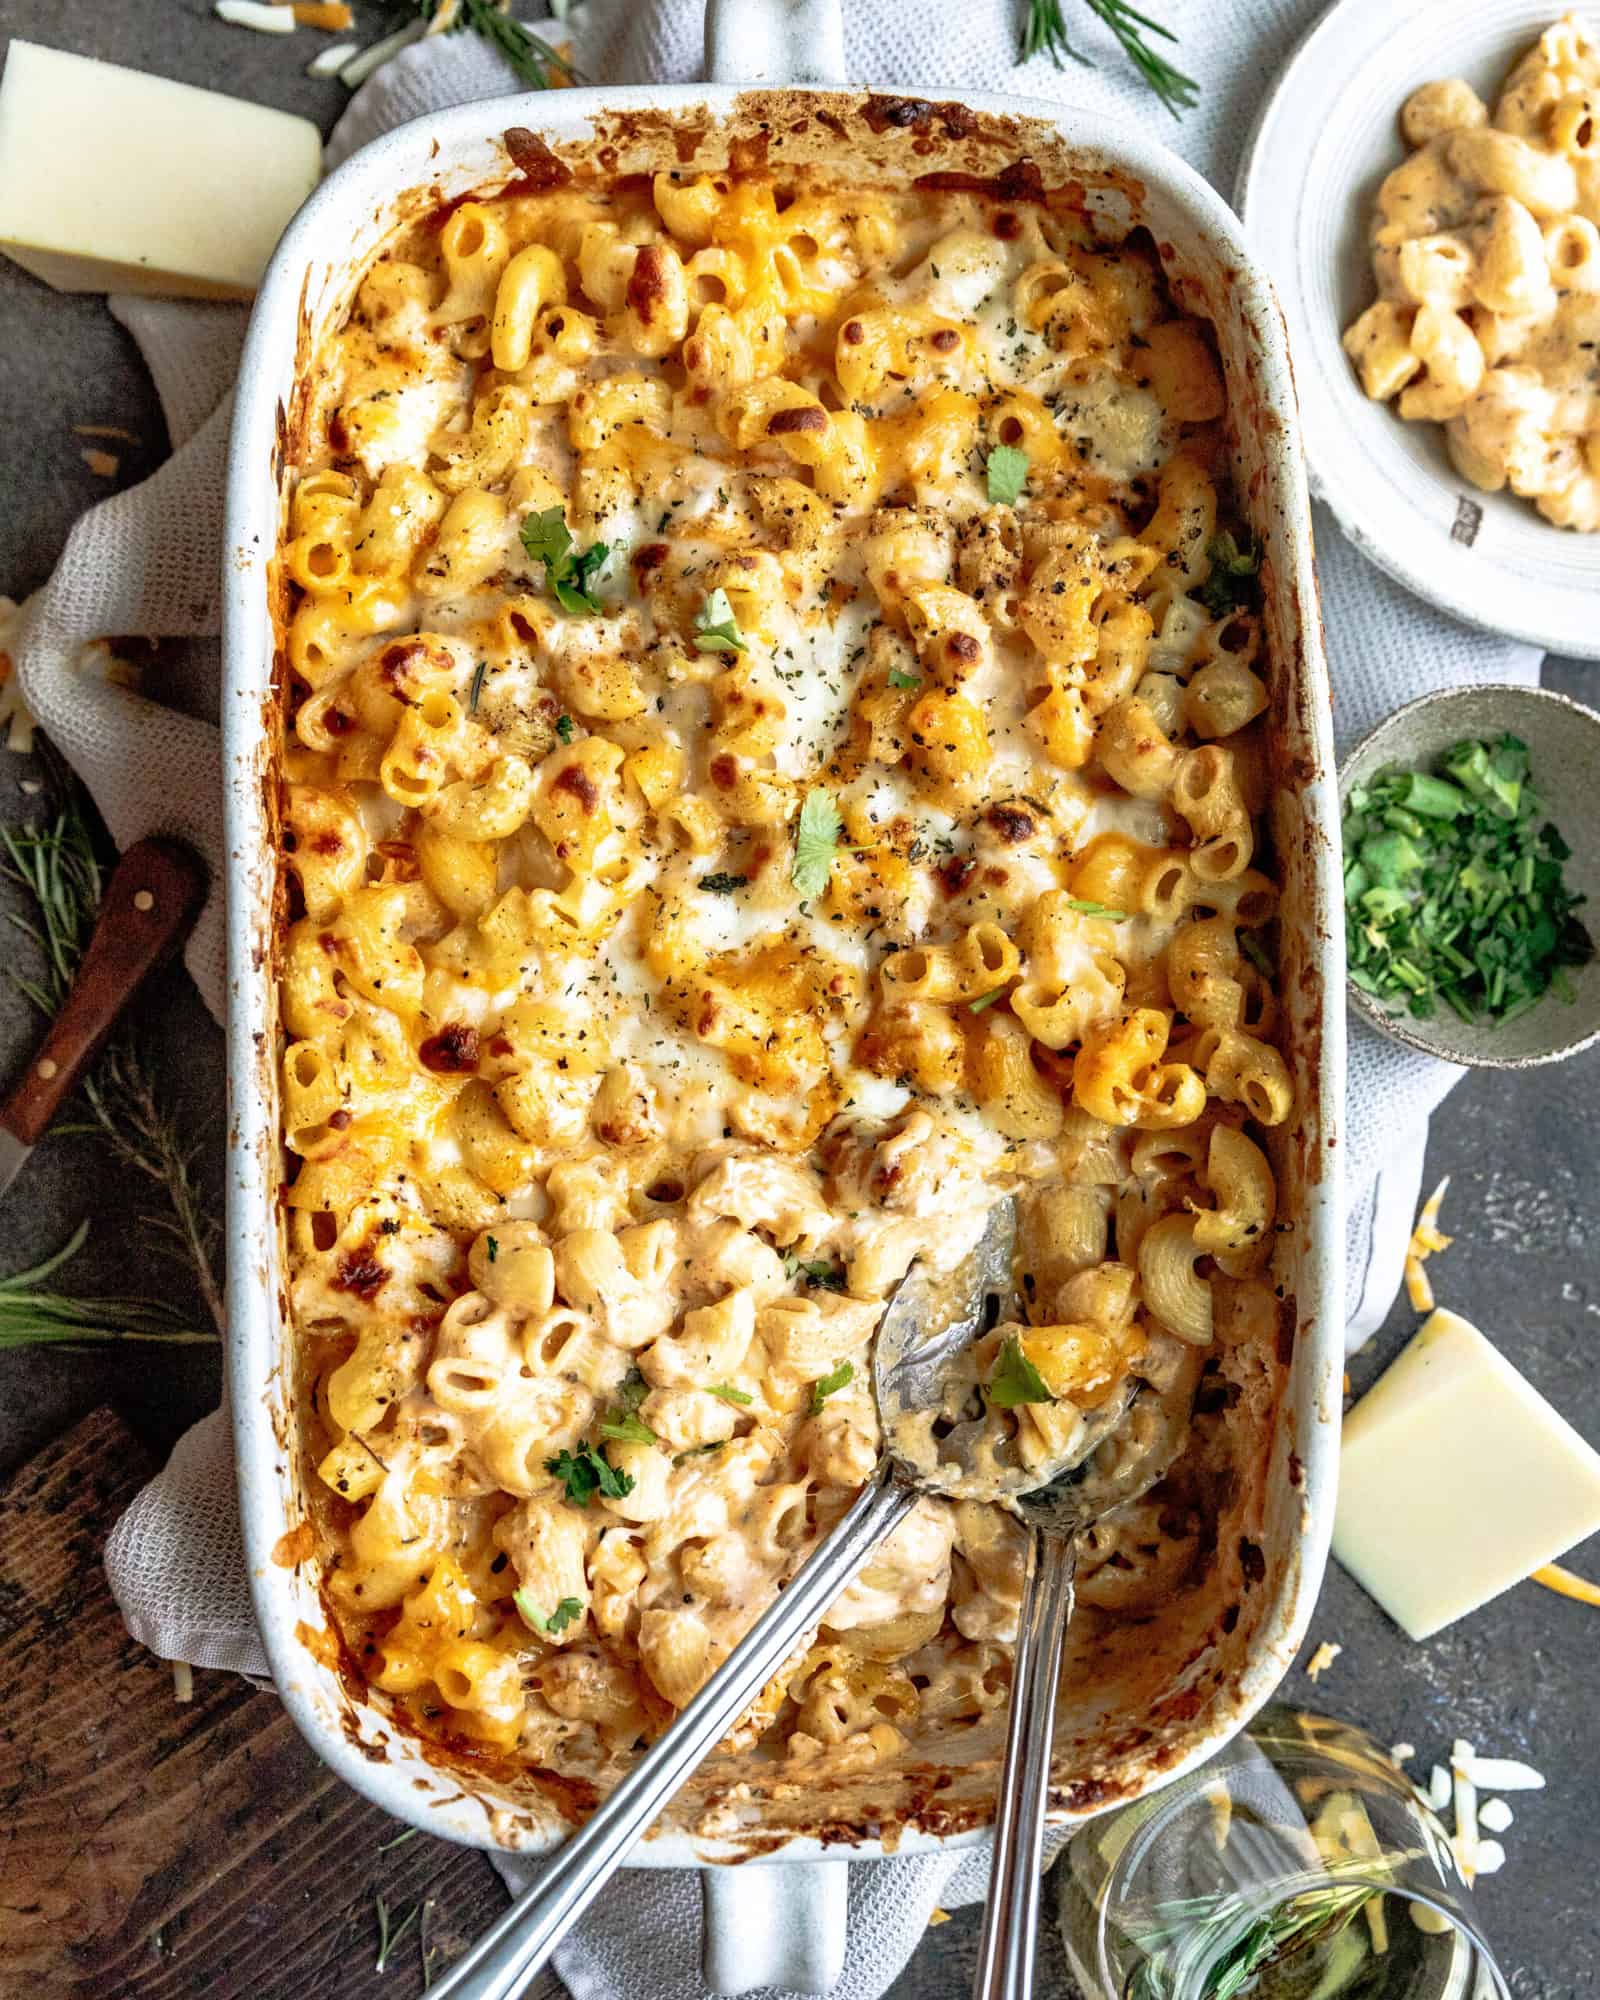 Baked Macaroni and Cheese in a baking dish